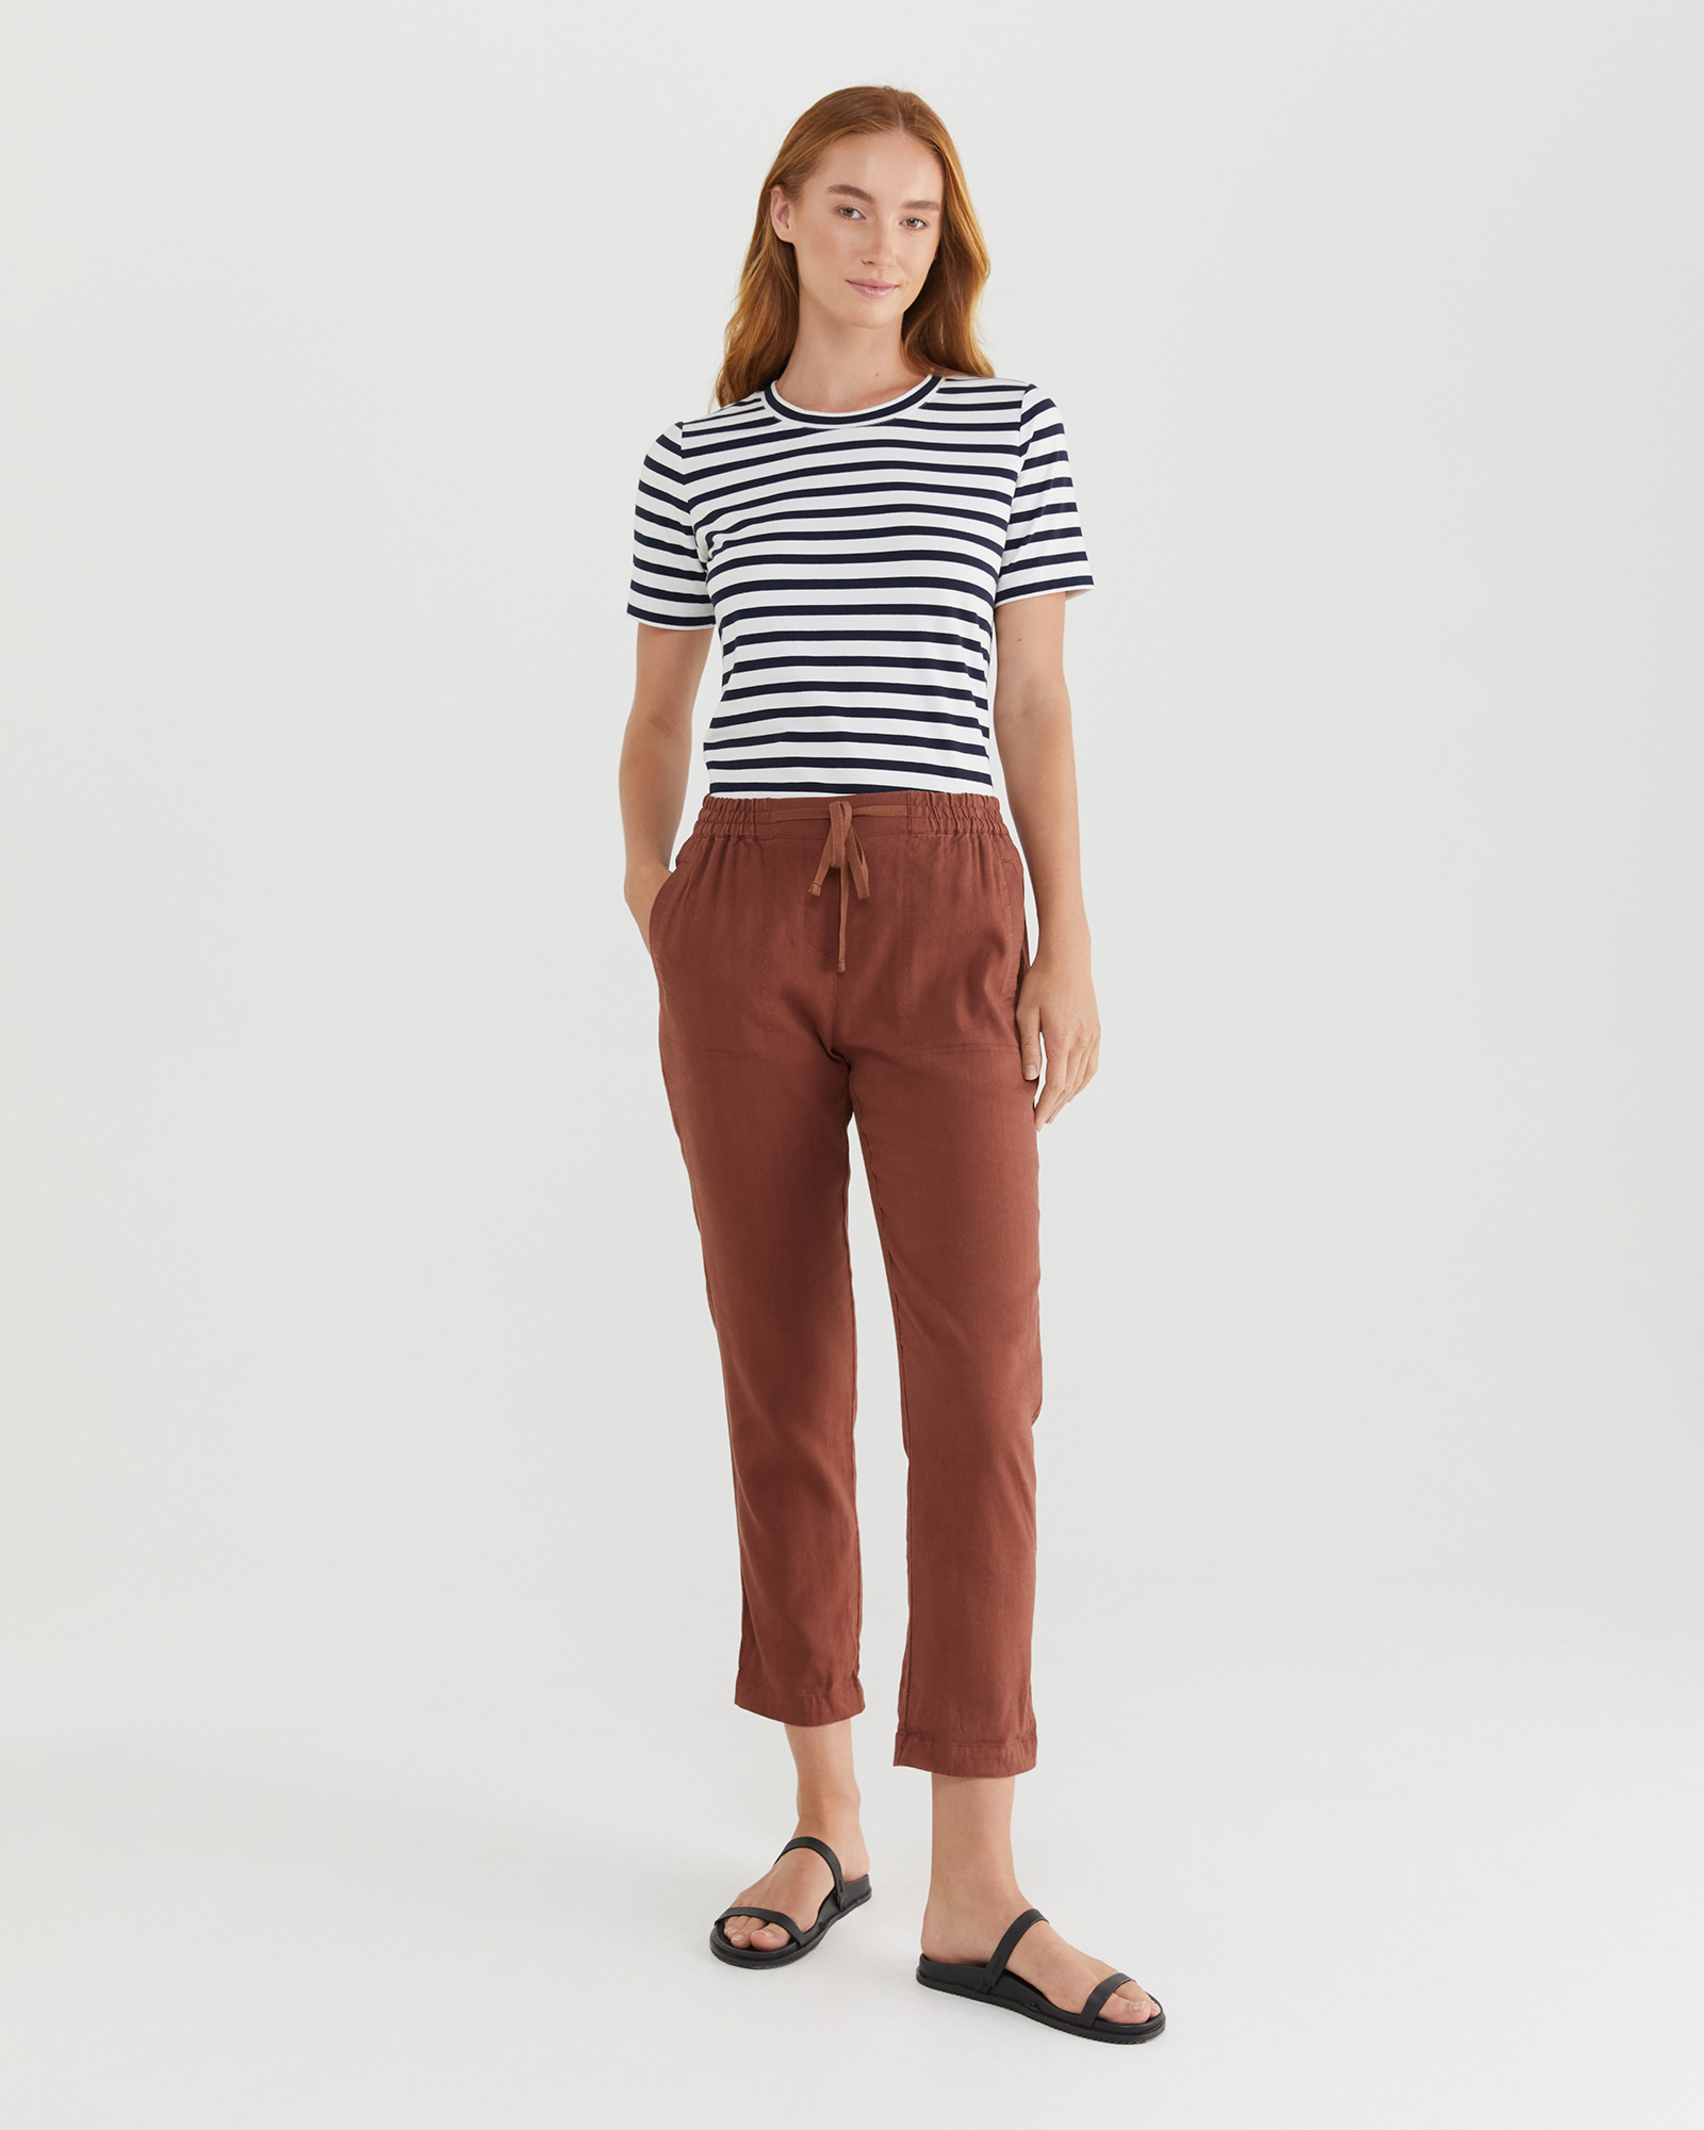 Rosa Linen Pant in CHOCOLATE